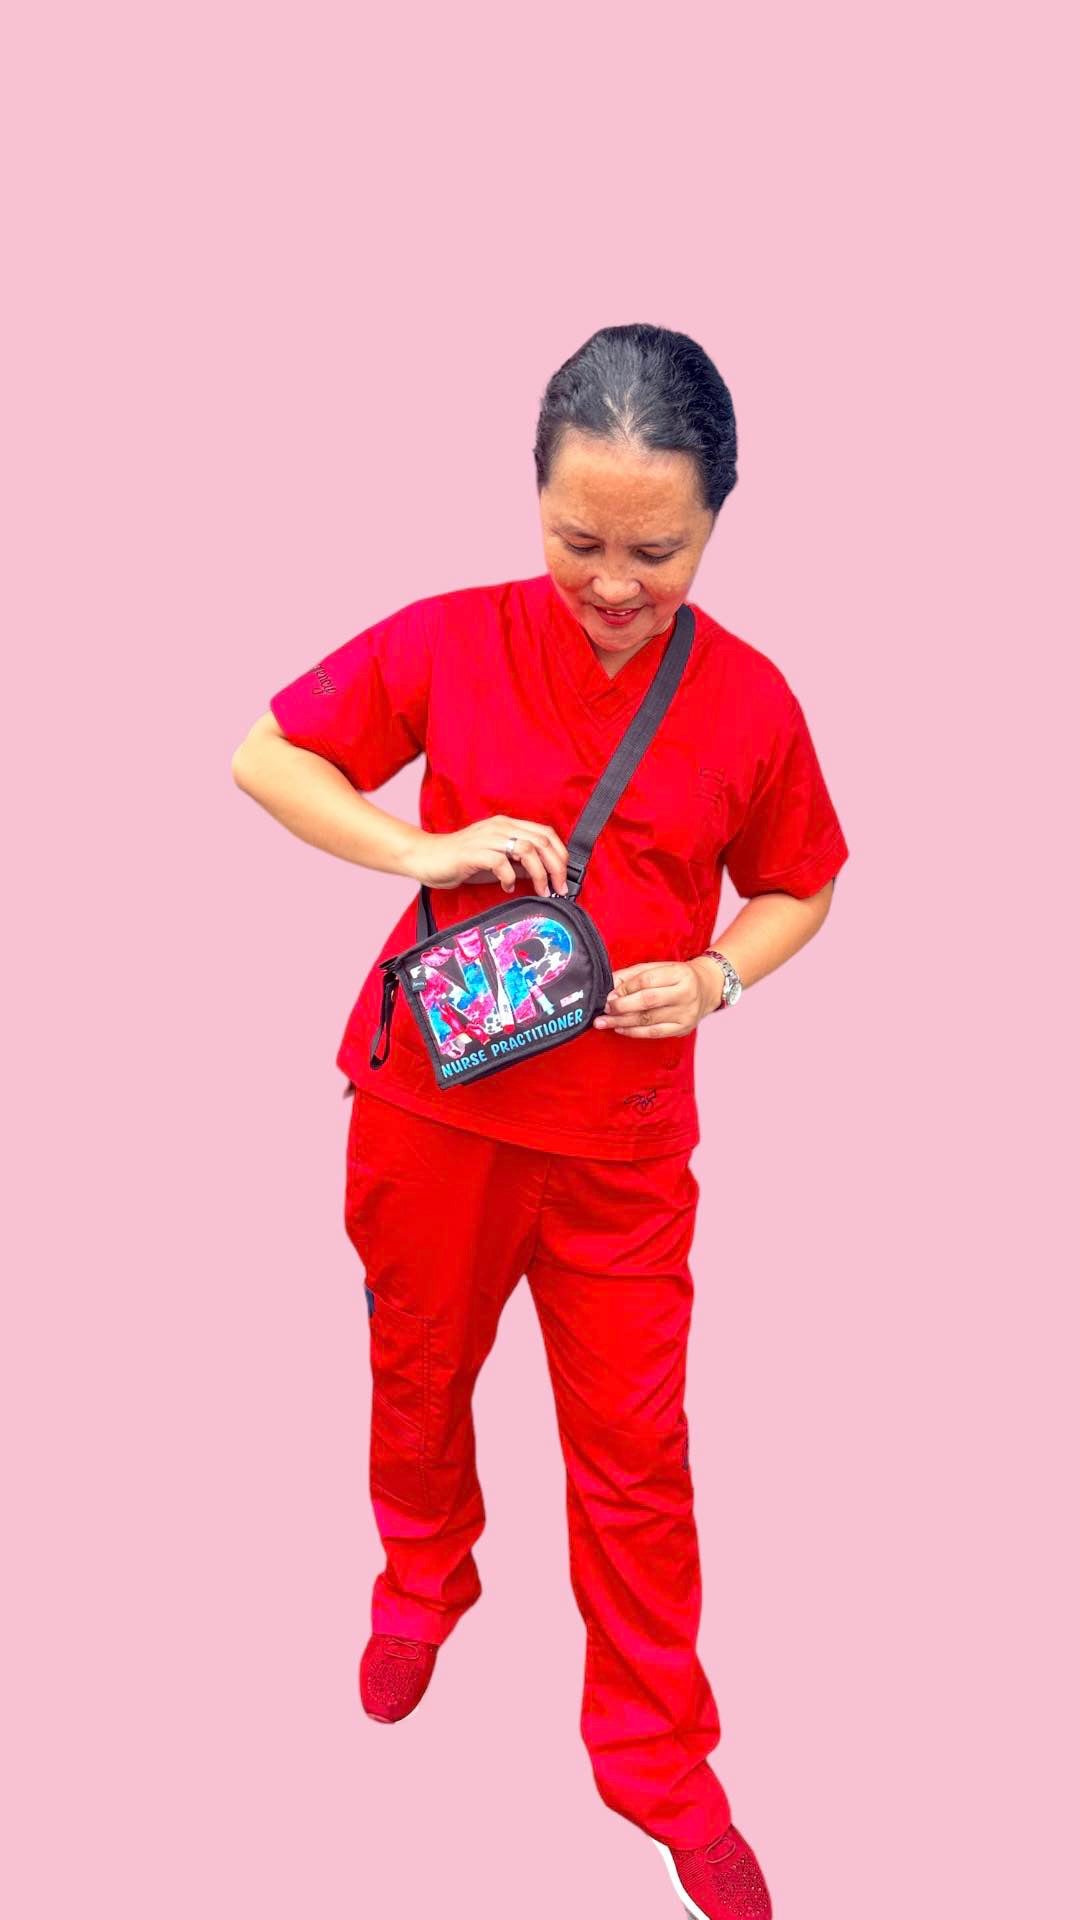 Discover the ultimate accessory for healthcare professionals – the versatile nurse sling bag. Stay organized and stylish on the go. Get yours now!"